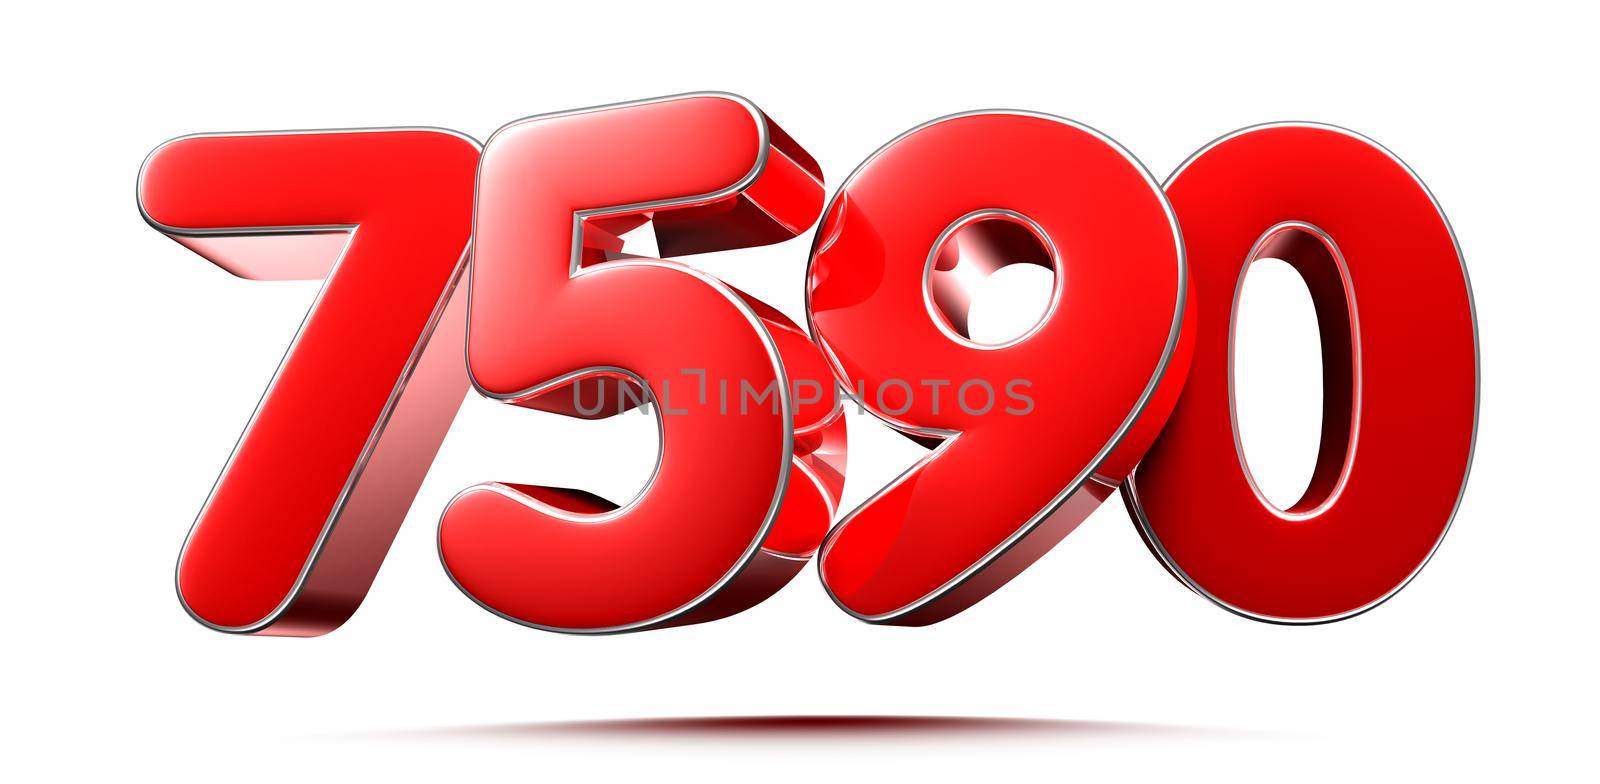 Rounded red numbers 7590 on white background 3D illustration with clipping path